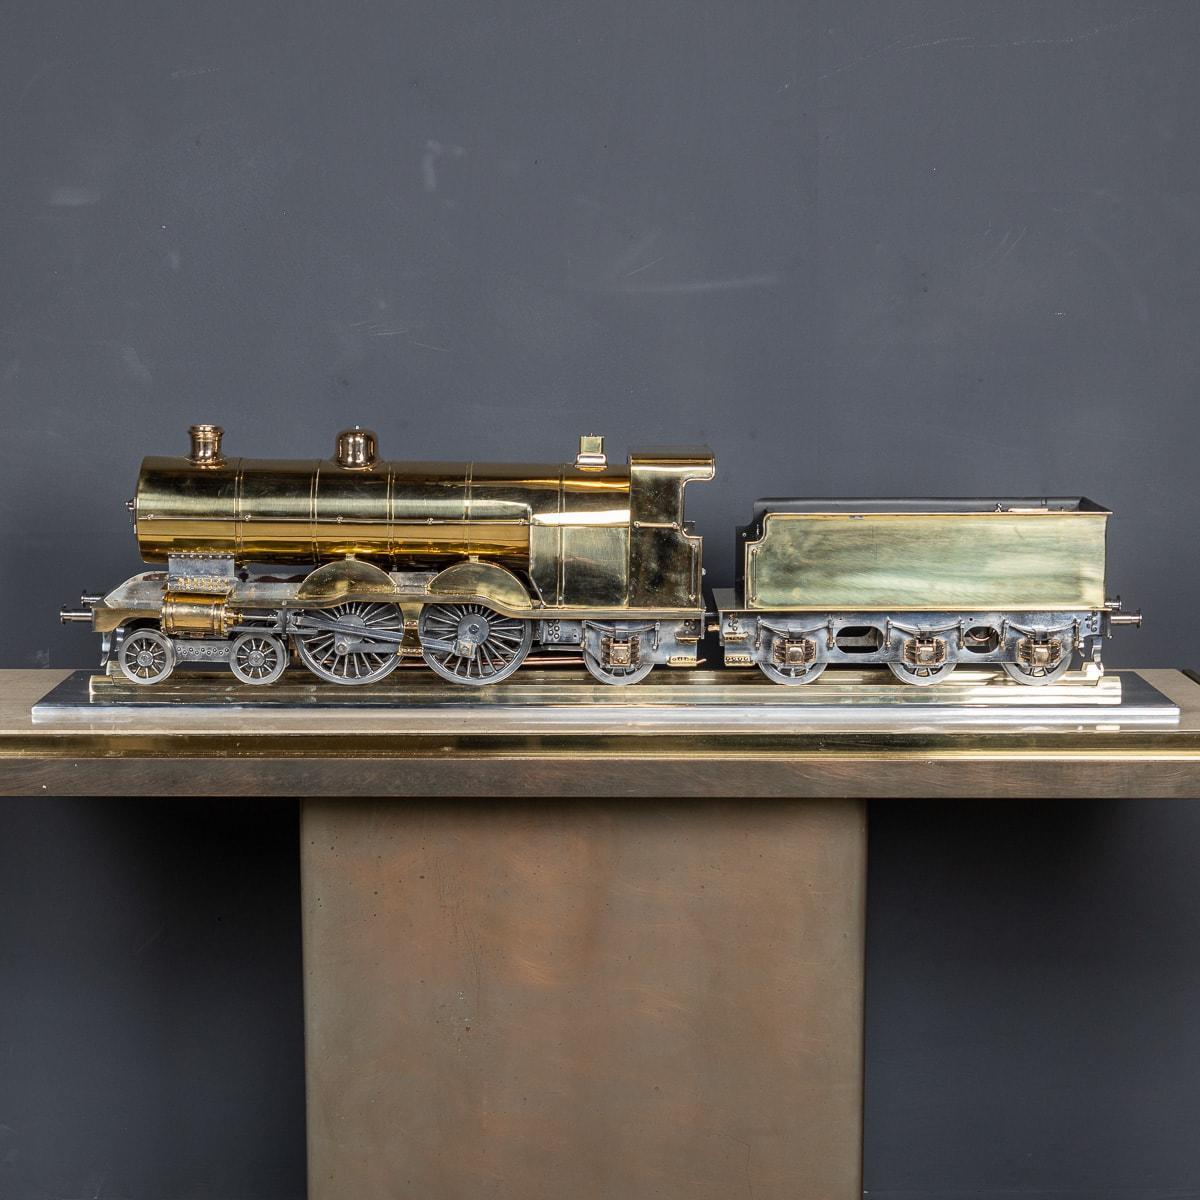 Early 20th Century brass model, showcasing the GNR Atlantic locomotive 251 and its three-axle tender. Crafted to a 3 1/2 inch gauge, the model gleams with polished brass, copper, and steel elements. Intricate details within the cab, such as the